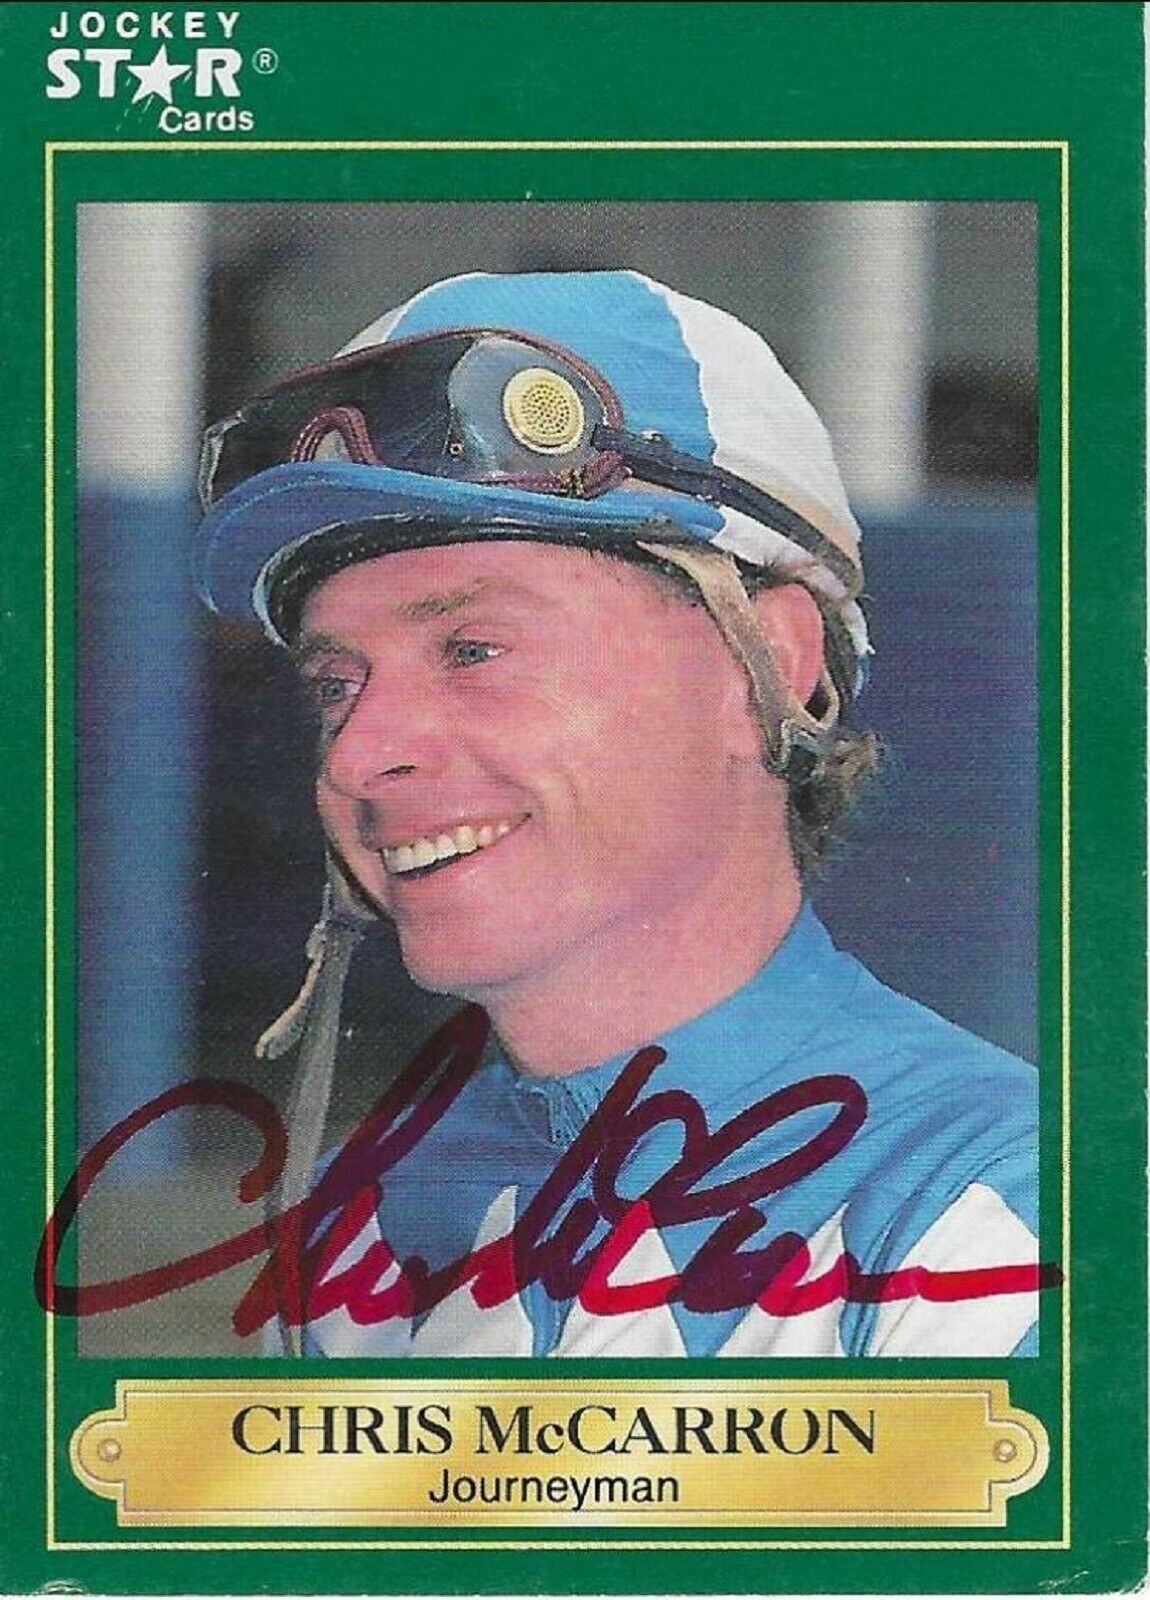 1991 Jockey Star "chris Mccarron" Autograph Trading Card In Excellent Condition